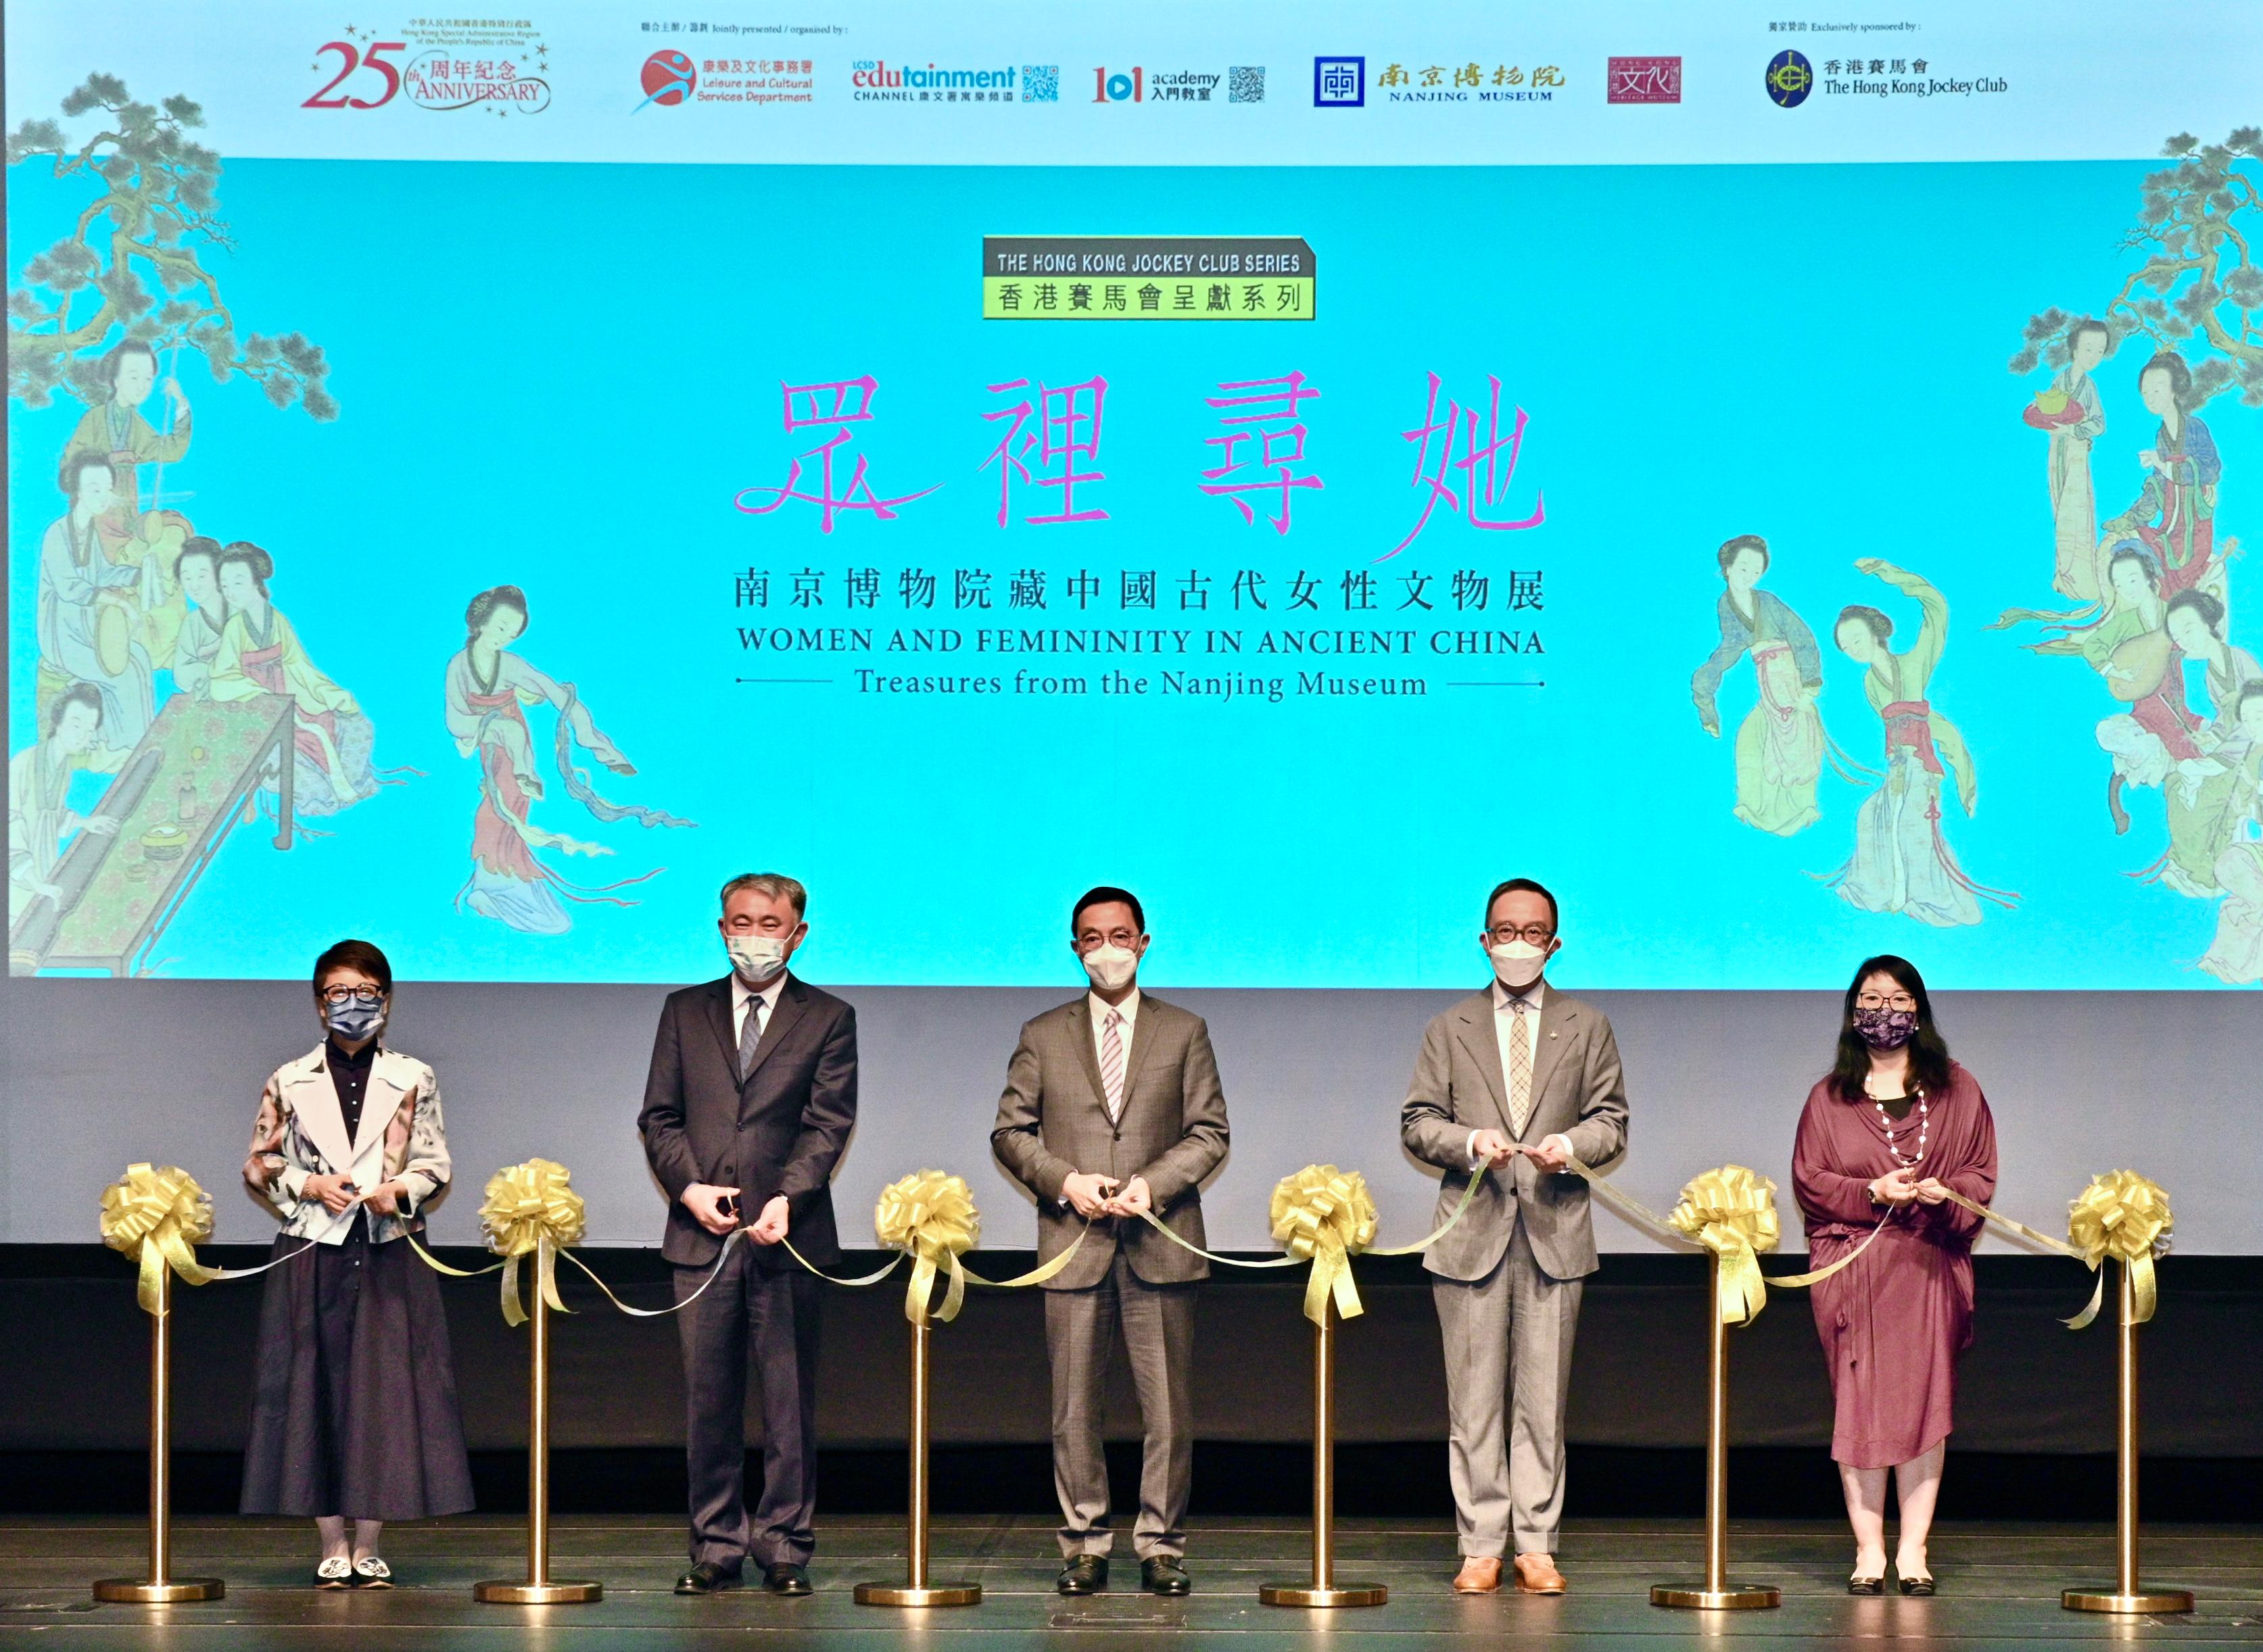 The opening ceremony for the exhibition "The Hong Kong Jockey Club Series: Women and Femininity in Ancient China - Treasures from the Nanjing Museum" was held today (November 29) at the Hong Kong Heritage Museum (HKHM). Photo shows officiating guests (from left) the Deputy Director of Leisure and Cultural Services (Culture), Ms Eve Tam; the Vice Director of the Nanjing Museum, Mr Wang Qizhi; the Secretary for Culture, Sports and Tourism, Mr Kevin Yeung; the Executive Director, Charities and Community of the Hong Kong Jockey Club, Dr Gabriel Leung and the Museum Director of the HKHM, Ms Fione Lo at the event.